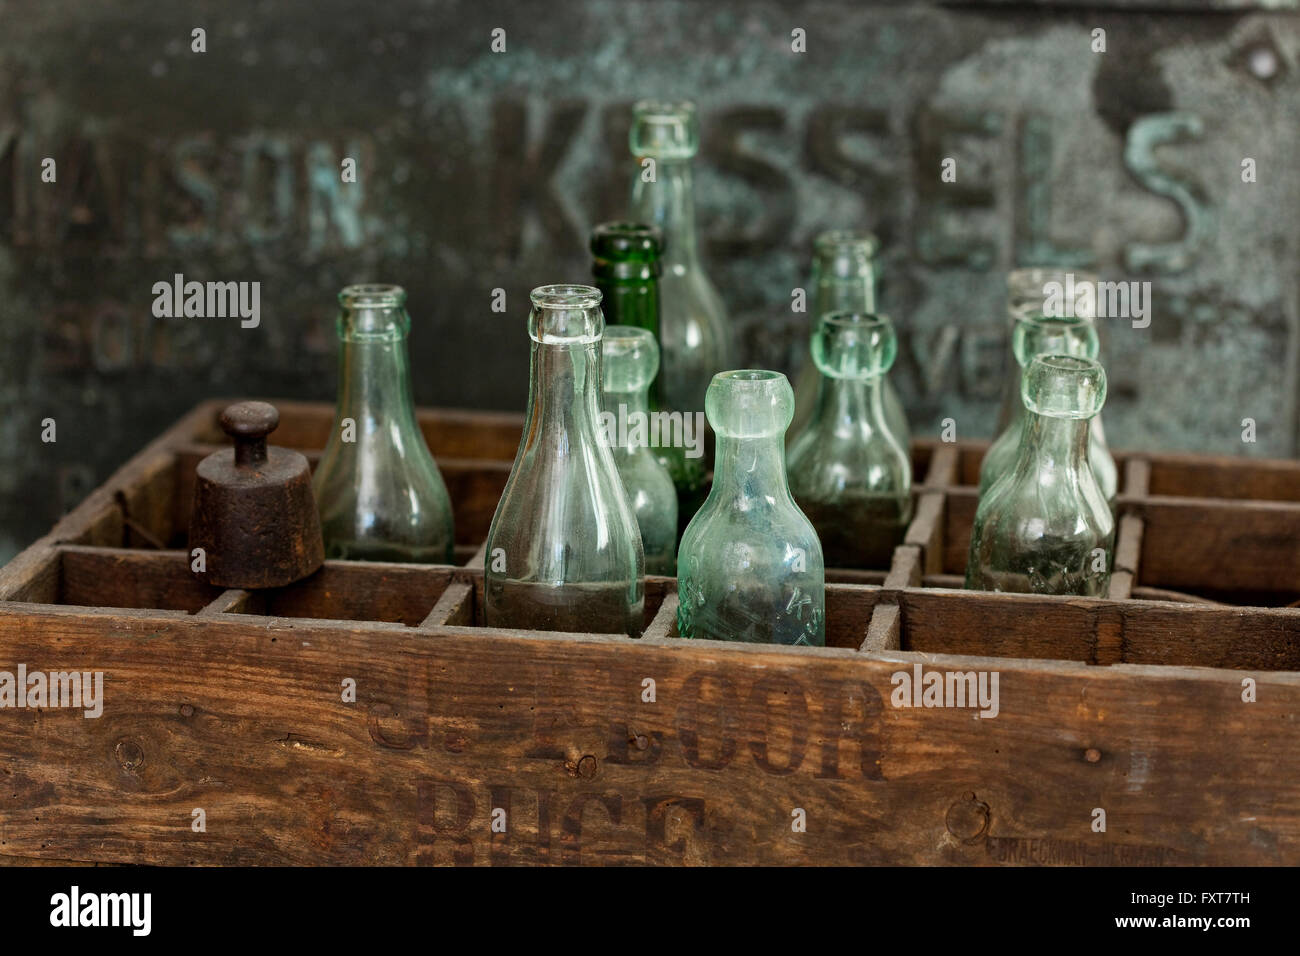 Wooden crate and vintage bottles Stock Photo